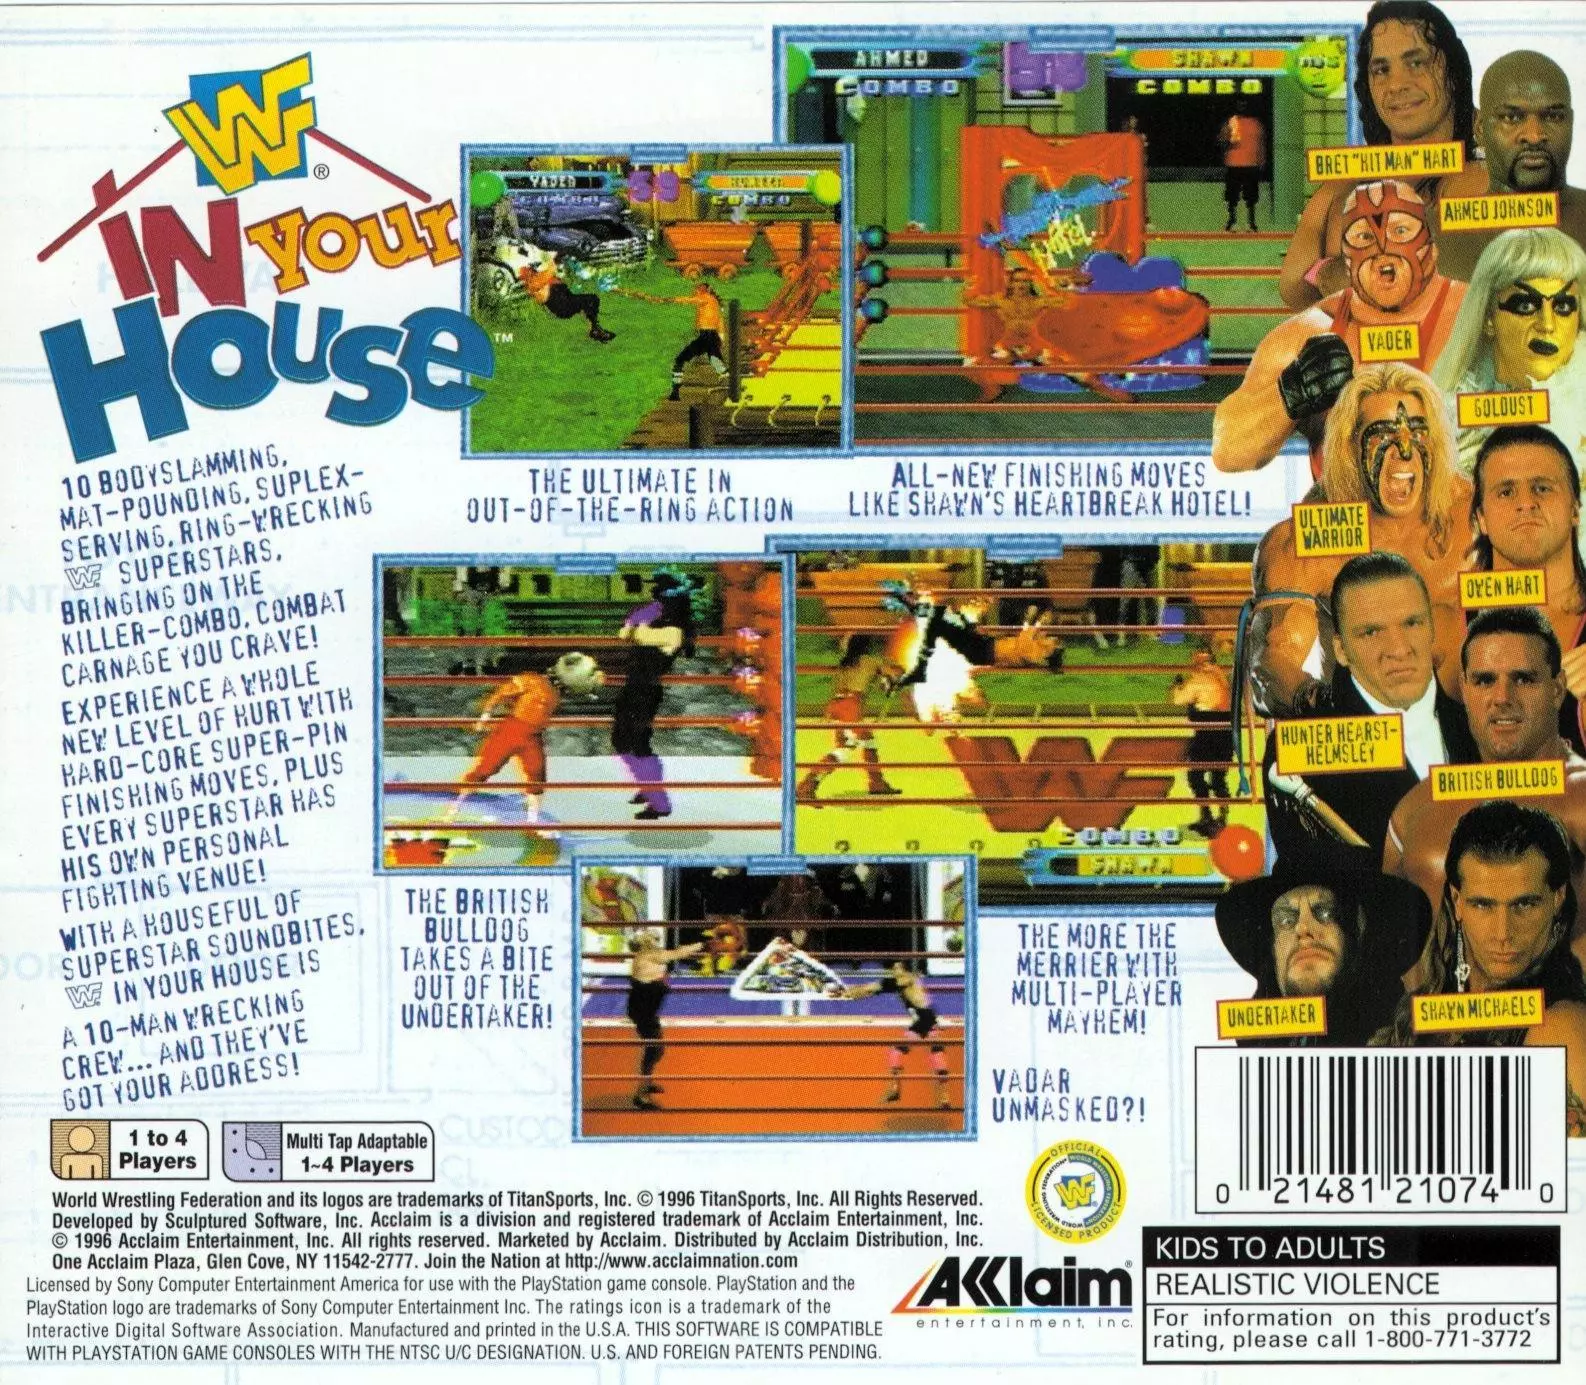 wwf in your house back cover